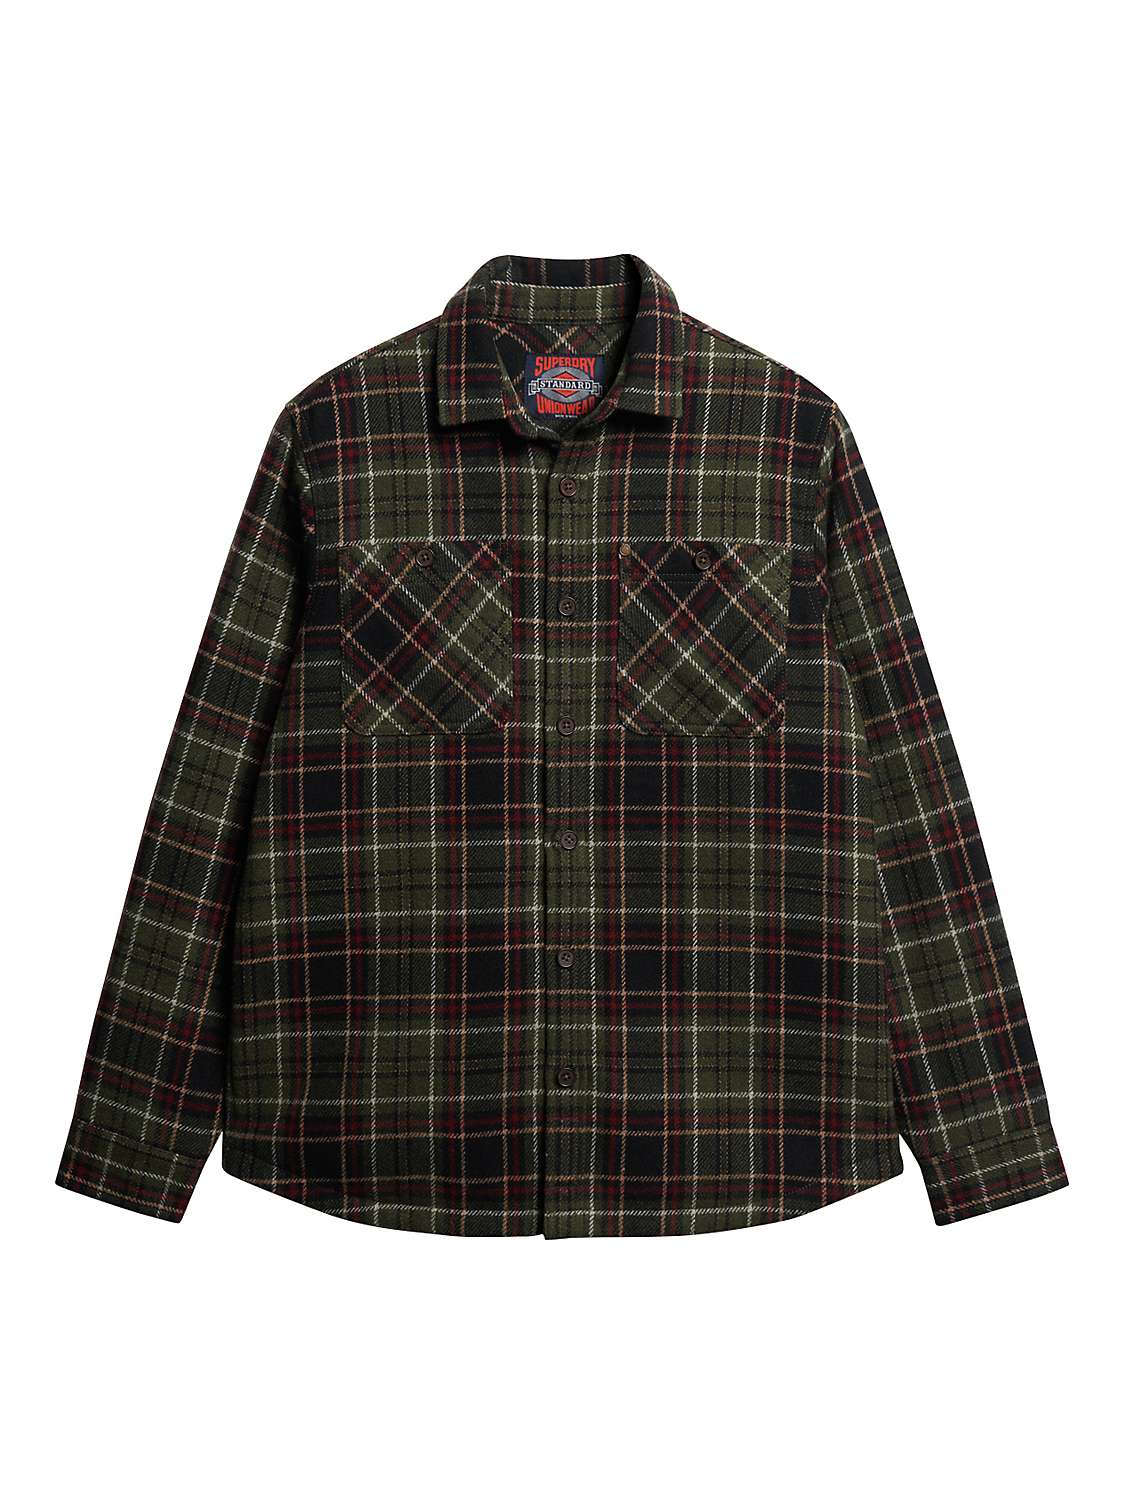 Buy Superdry TMS Quilted Overshirt, Green/Multi Online at johnlewis.com